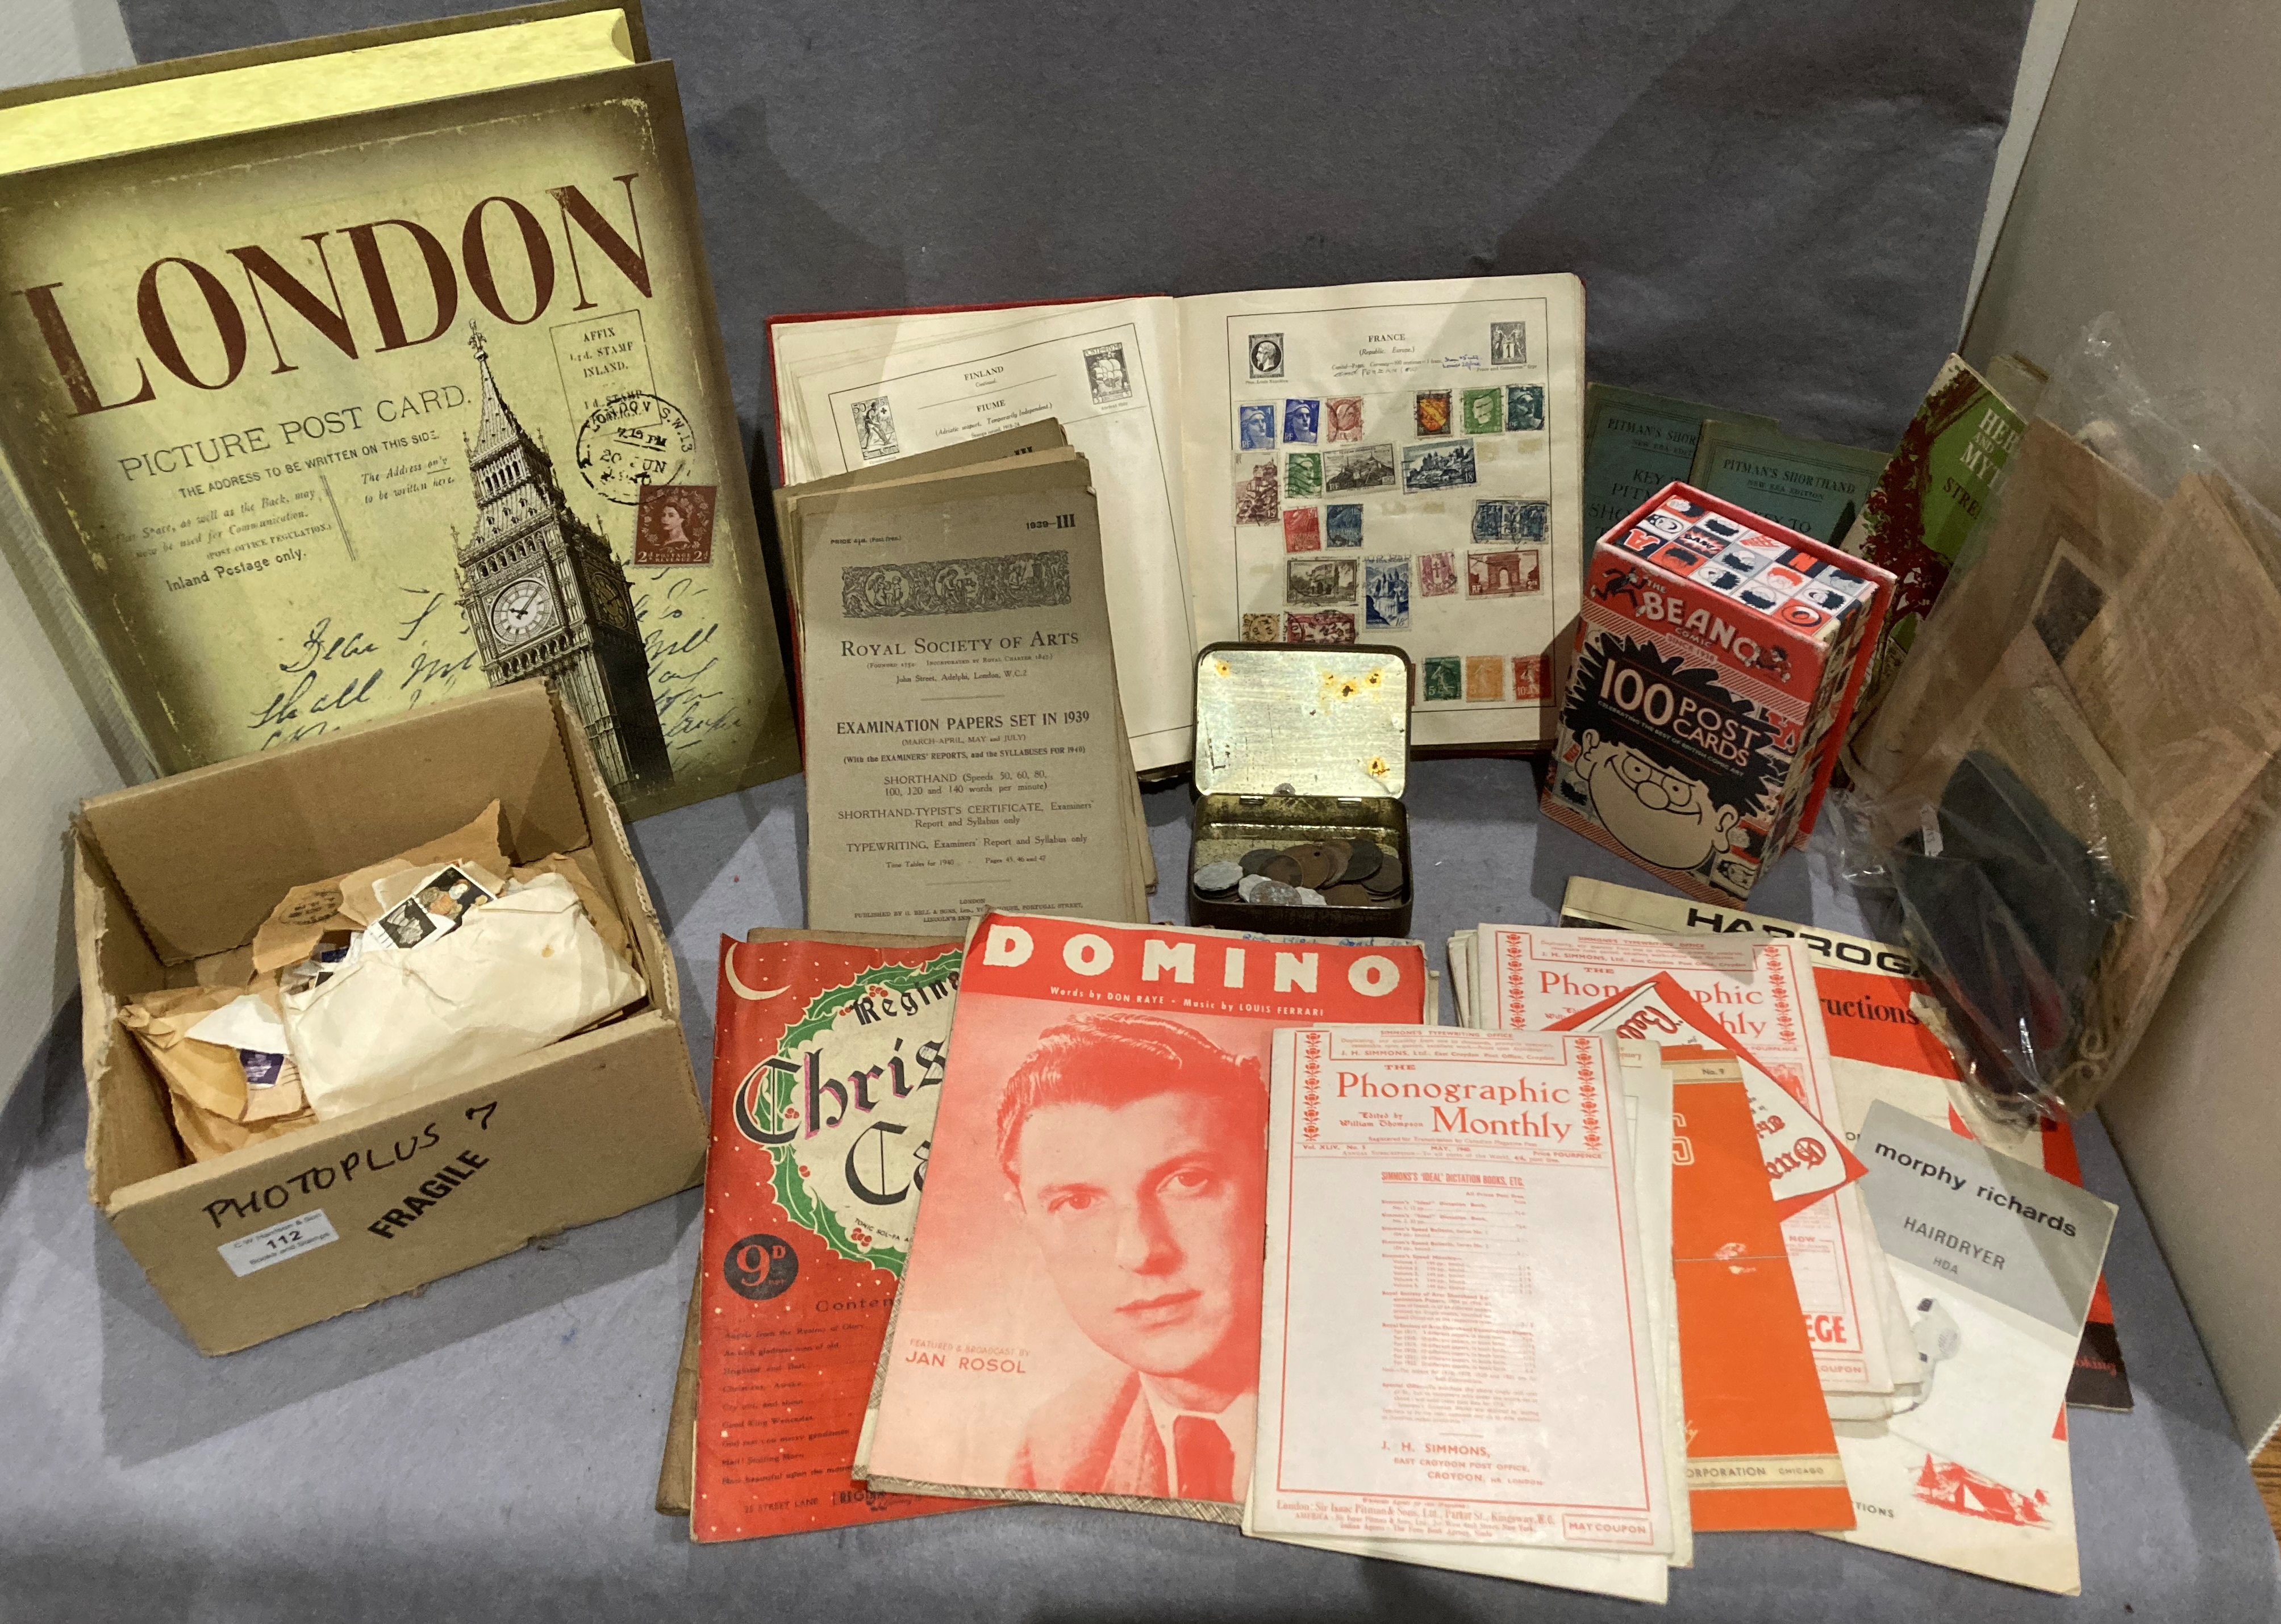 Contents to London Picture Post card box - a quantity of leaflets and booklets - Royal Society of